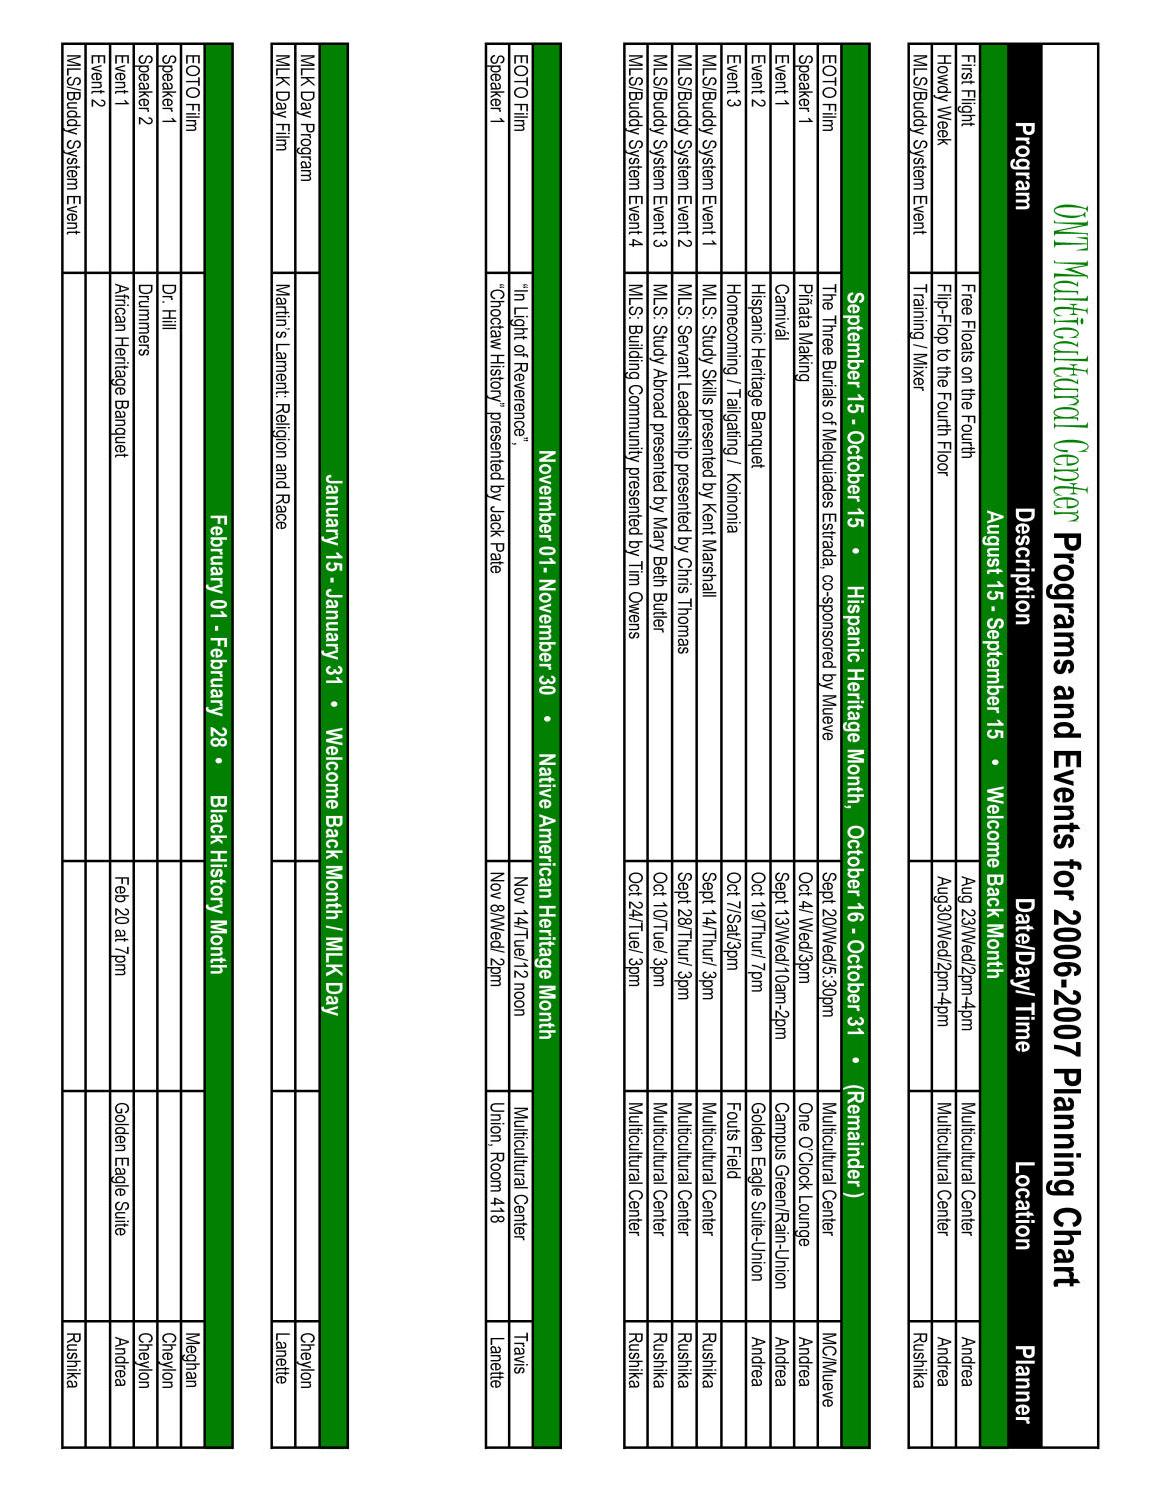 UNT Multicultural Center Programs and Events for 2006-2007 Planning Chart
                                                
                                                    [Sequence #]: 1 of 2
                                                